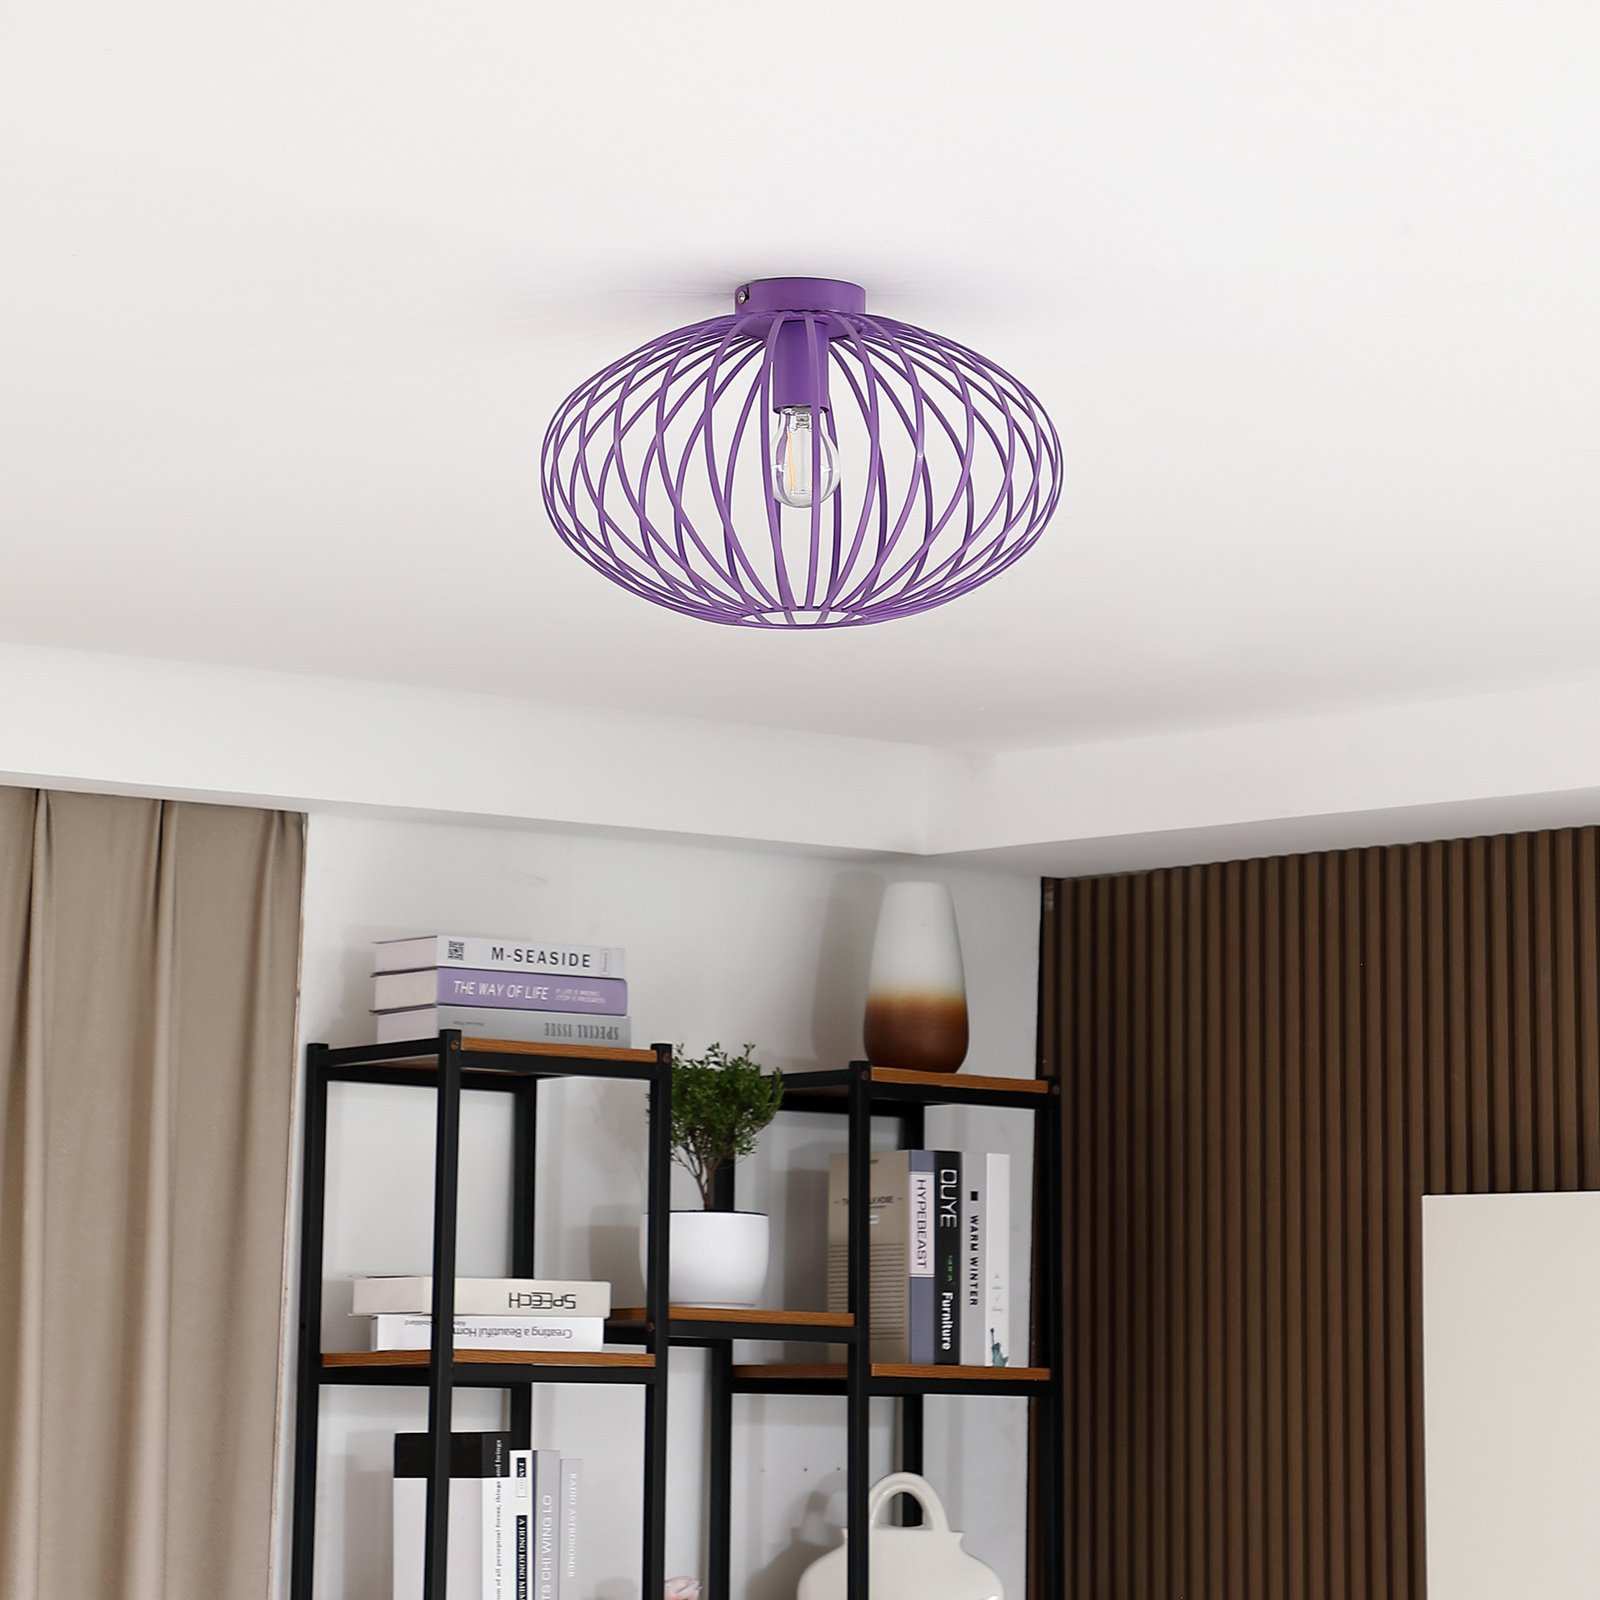 Lindby Maivi ceiling light cage purple 40 cm